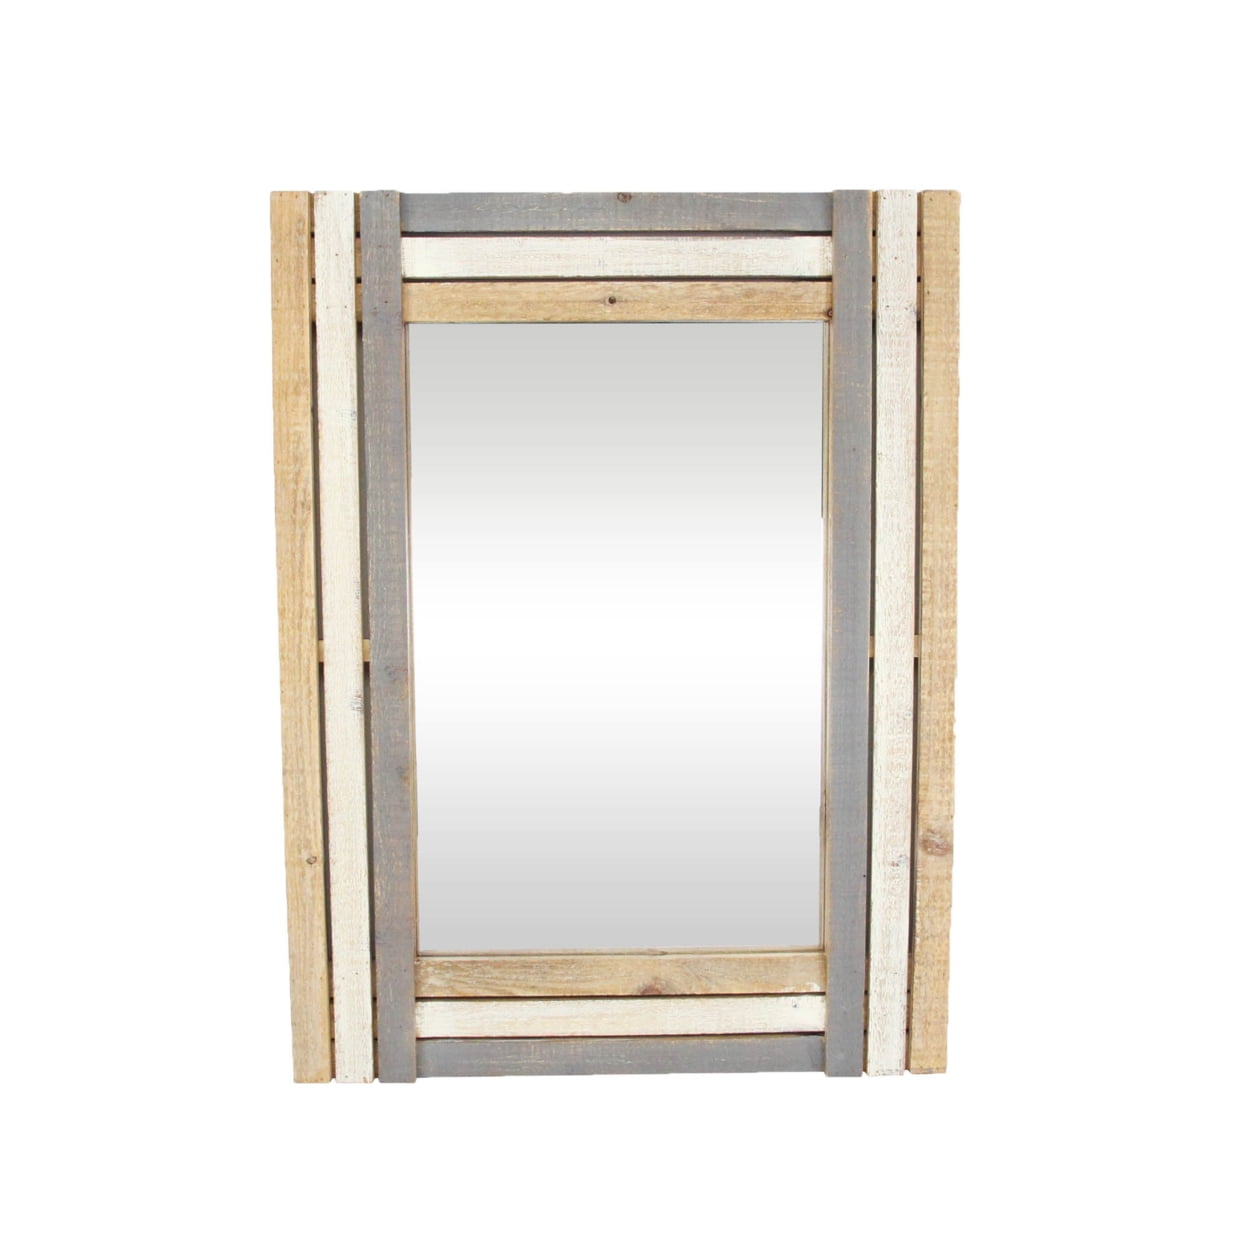 Picture of CheungsRattan 4674 Rectangular Multicolored Wood Framed Mirror